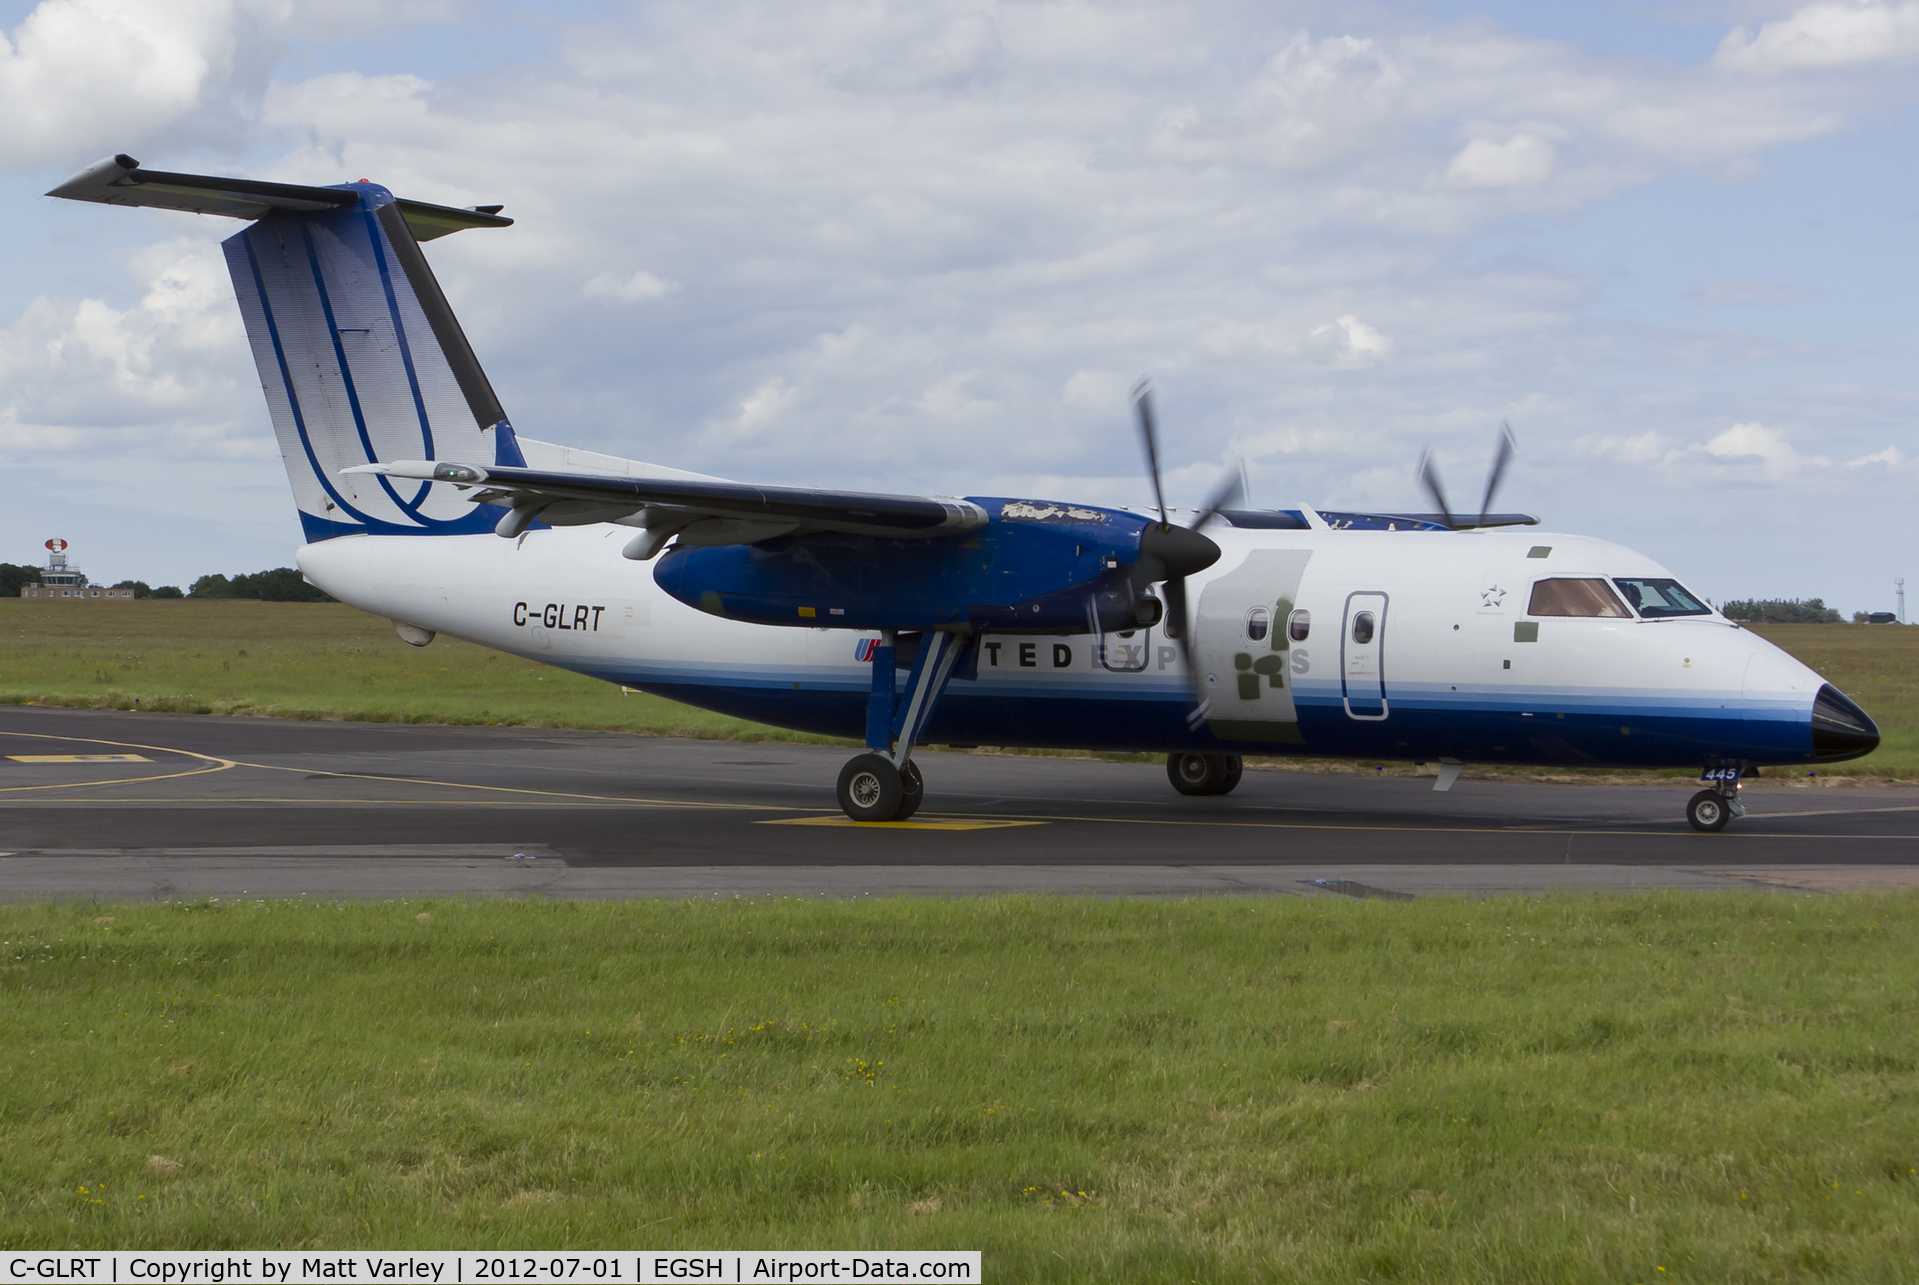 C-GLRT, 1996 De Havilland Canada DHC-8-202 Dash 8 C/N 445, Arriving at EGSH for spray by Air Livery.